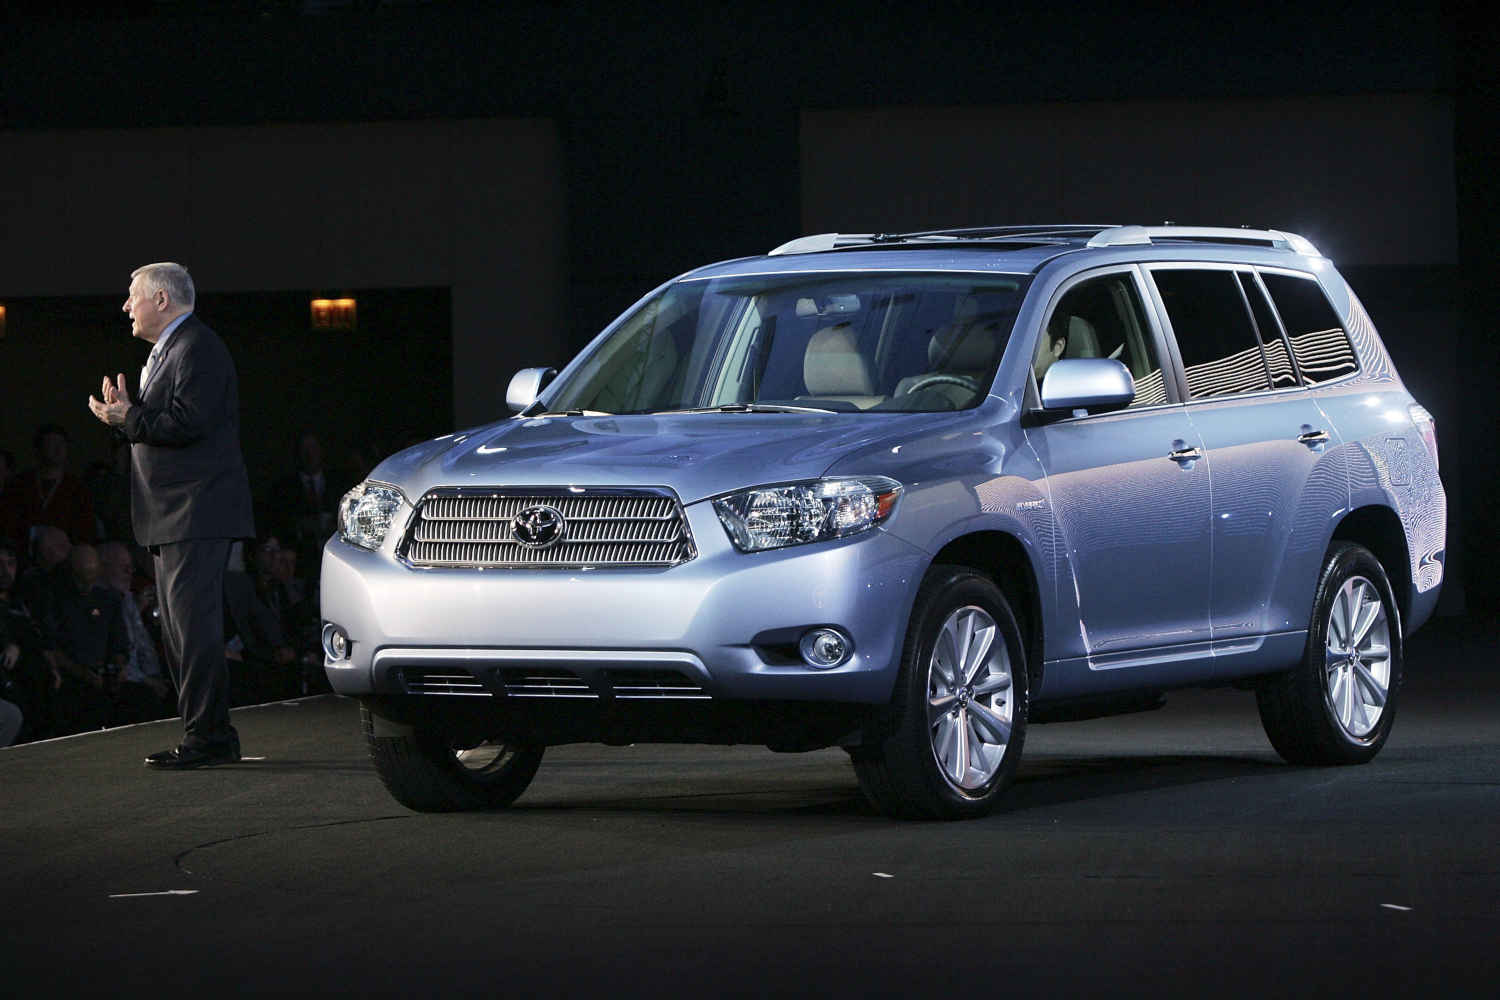 Find out what breaks on the Toyota Highlander